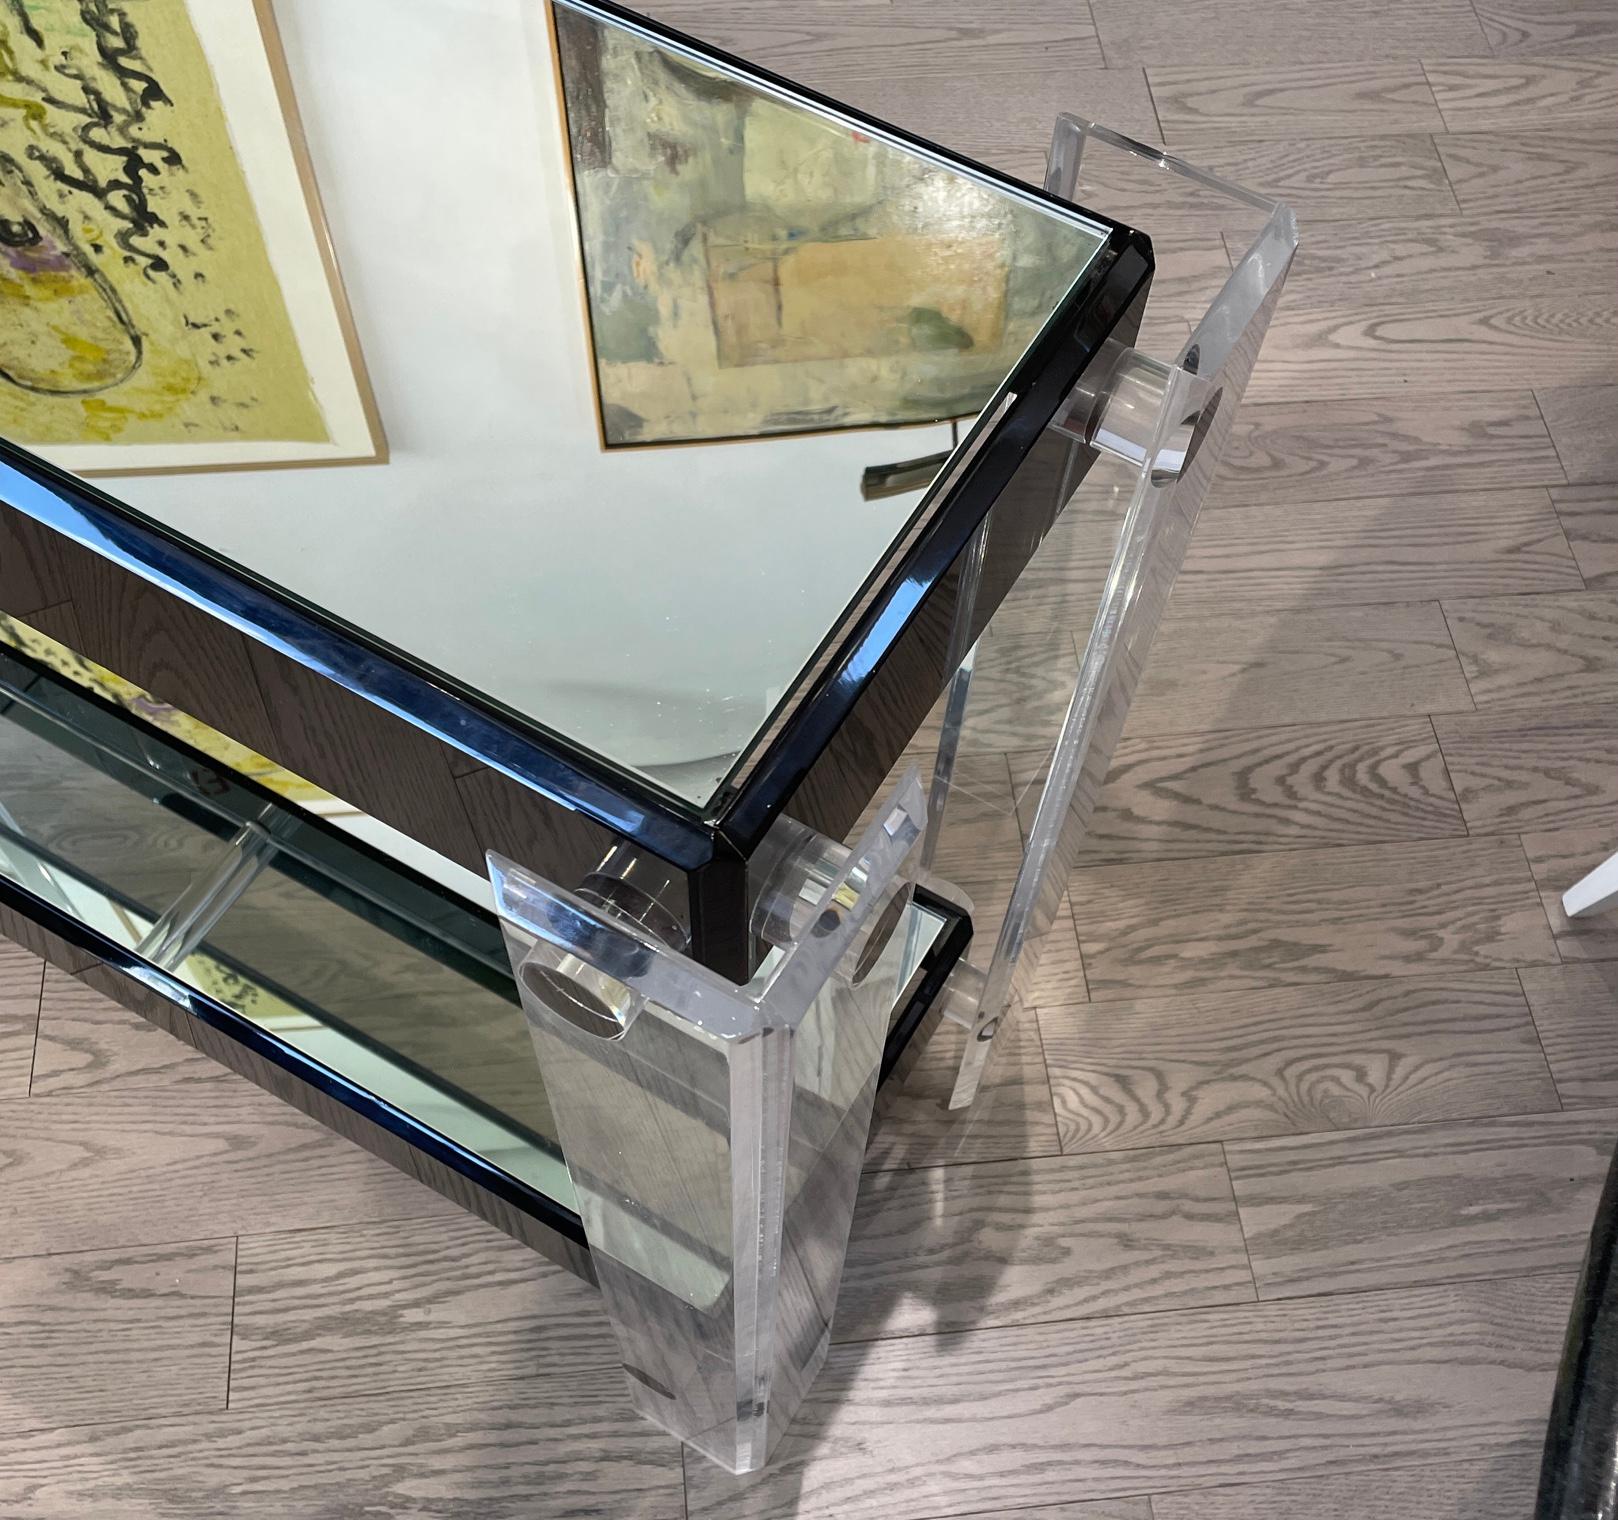 This is a nice lucite table with a mixture of clear and black lucite. It’s in the manner of Charles Hollis Jones. The top shelf is glass and the bottom shelf is mirror.